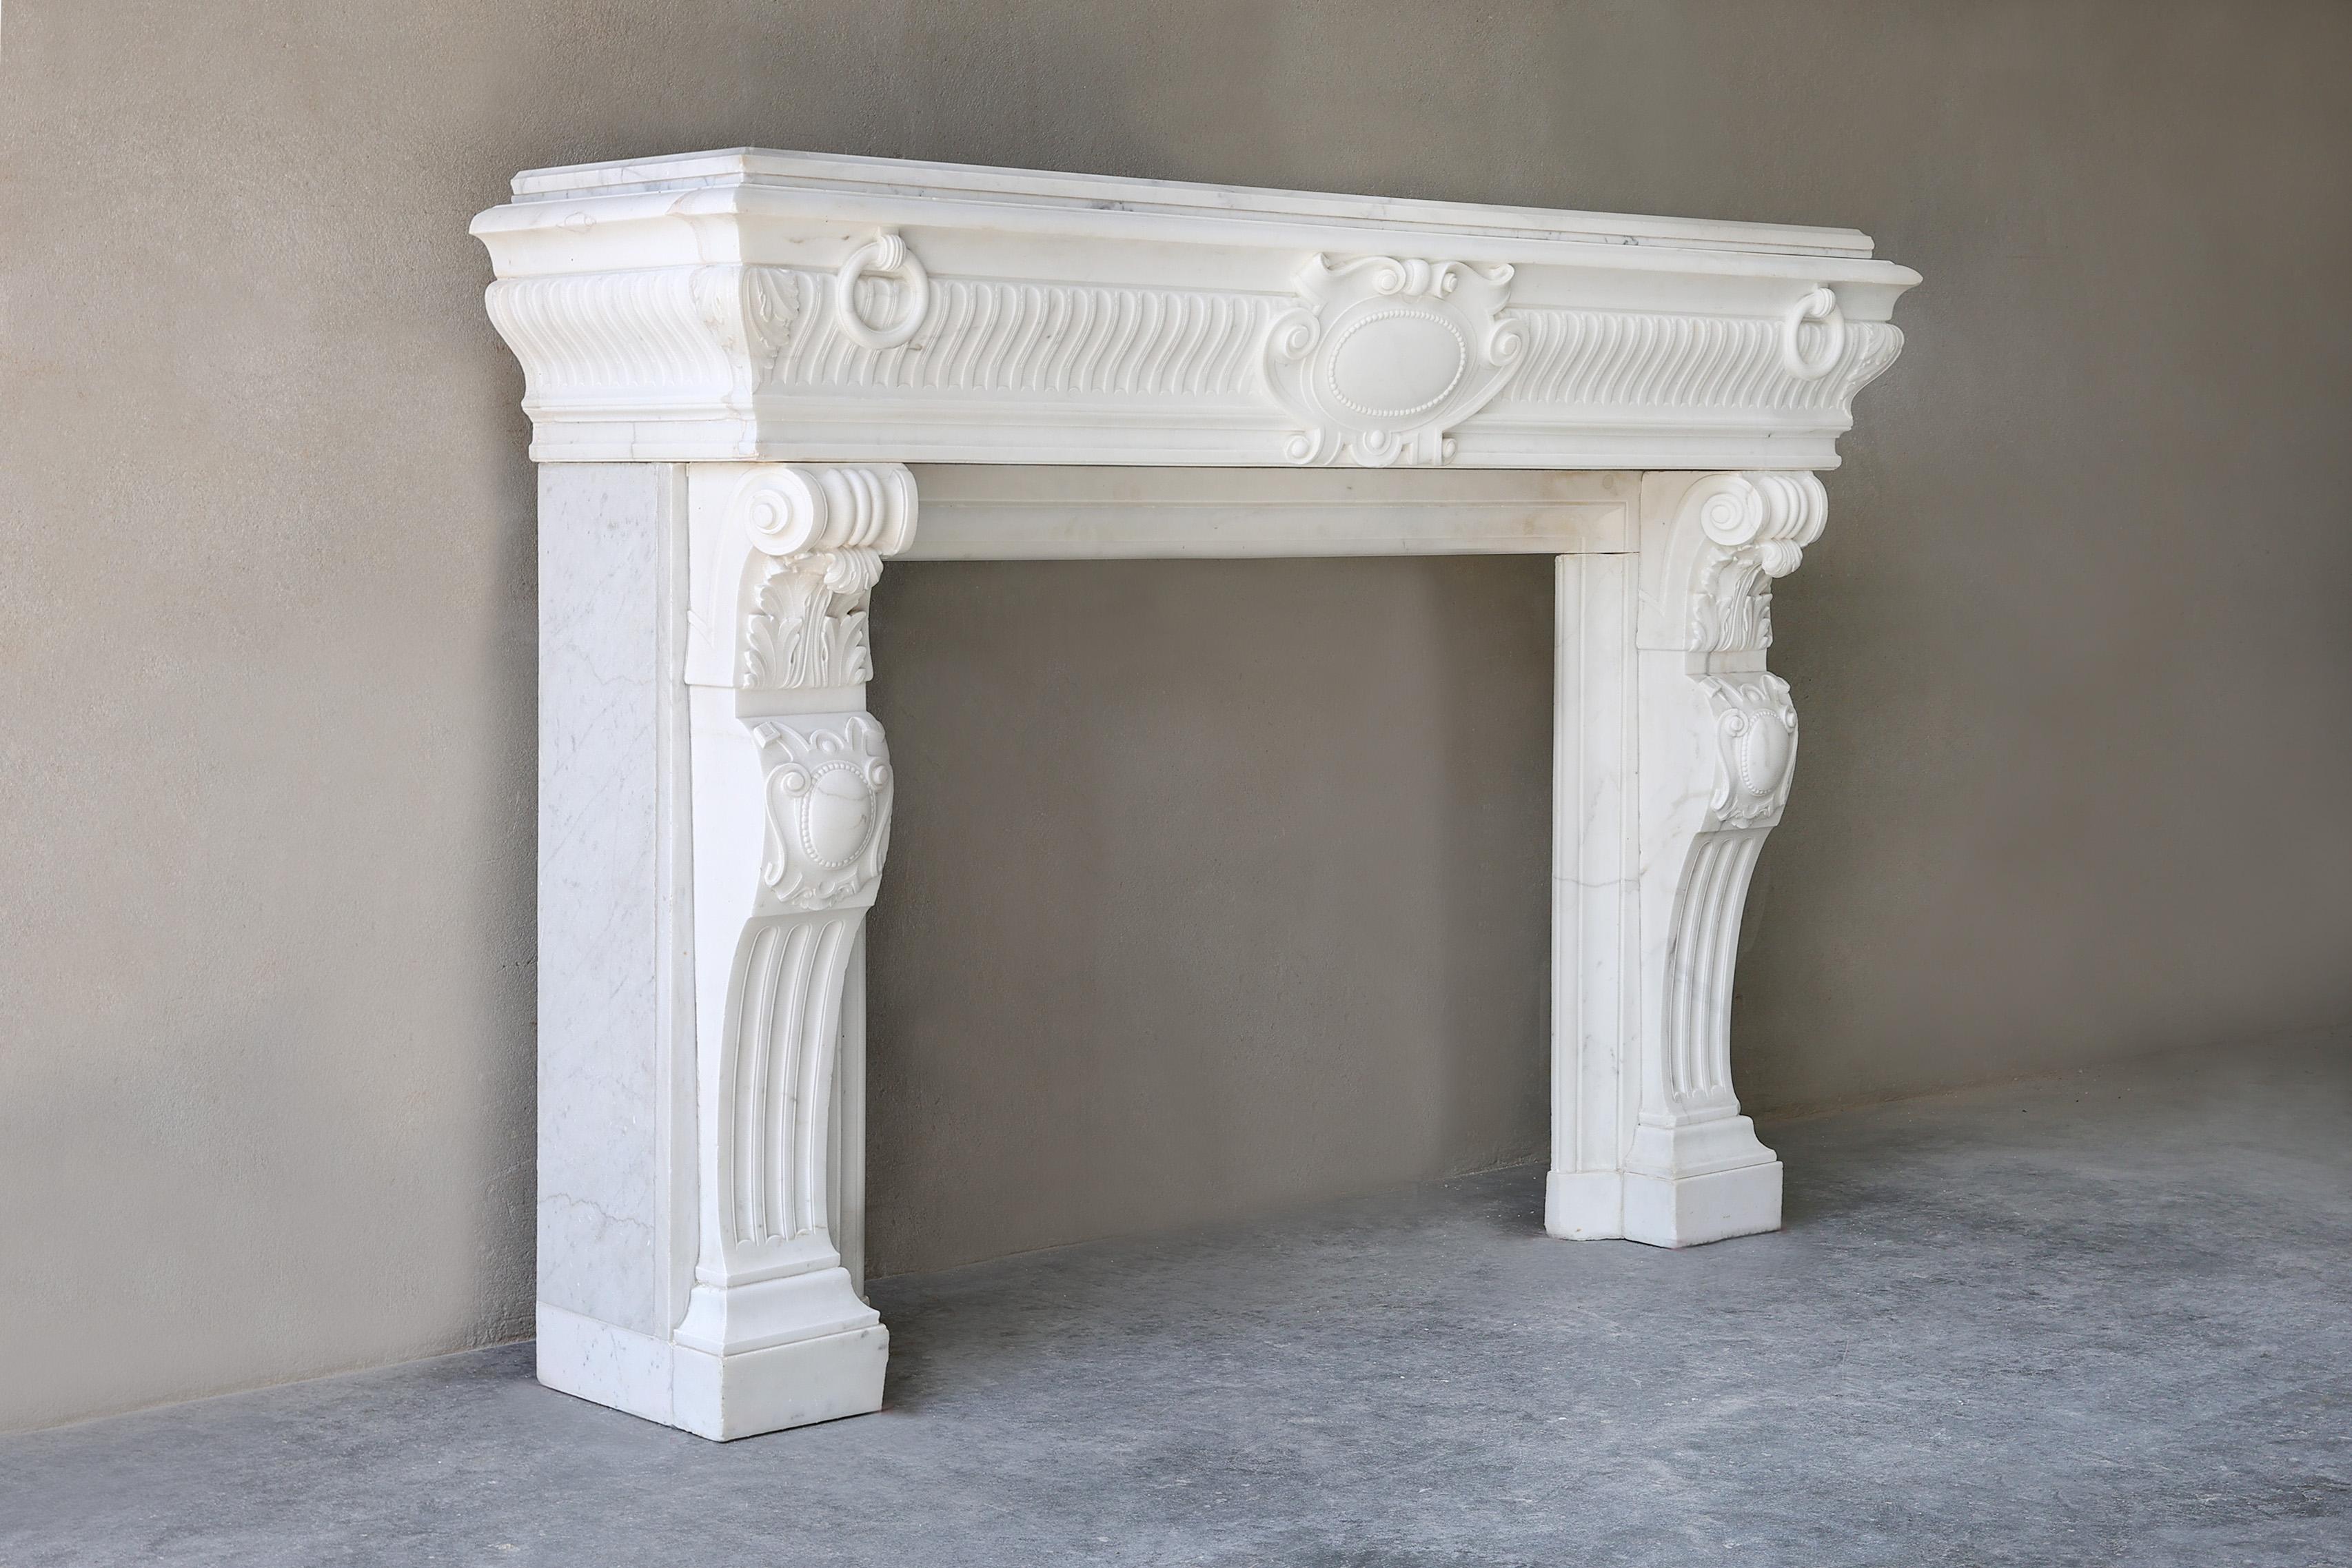 Beautiful authentic fireplace of Carrara marble from Italy. This 19th century fireplace is richly decorated with ornaments and flutes in the front part and on the legs. A colossal mantle with a chic look. This antique fireplace is in the style of